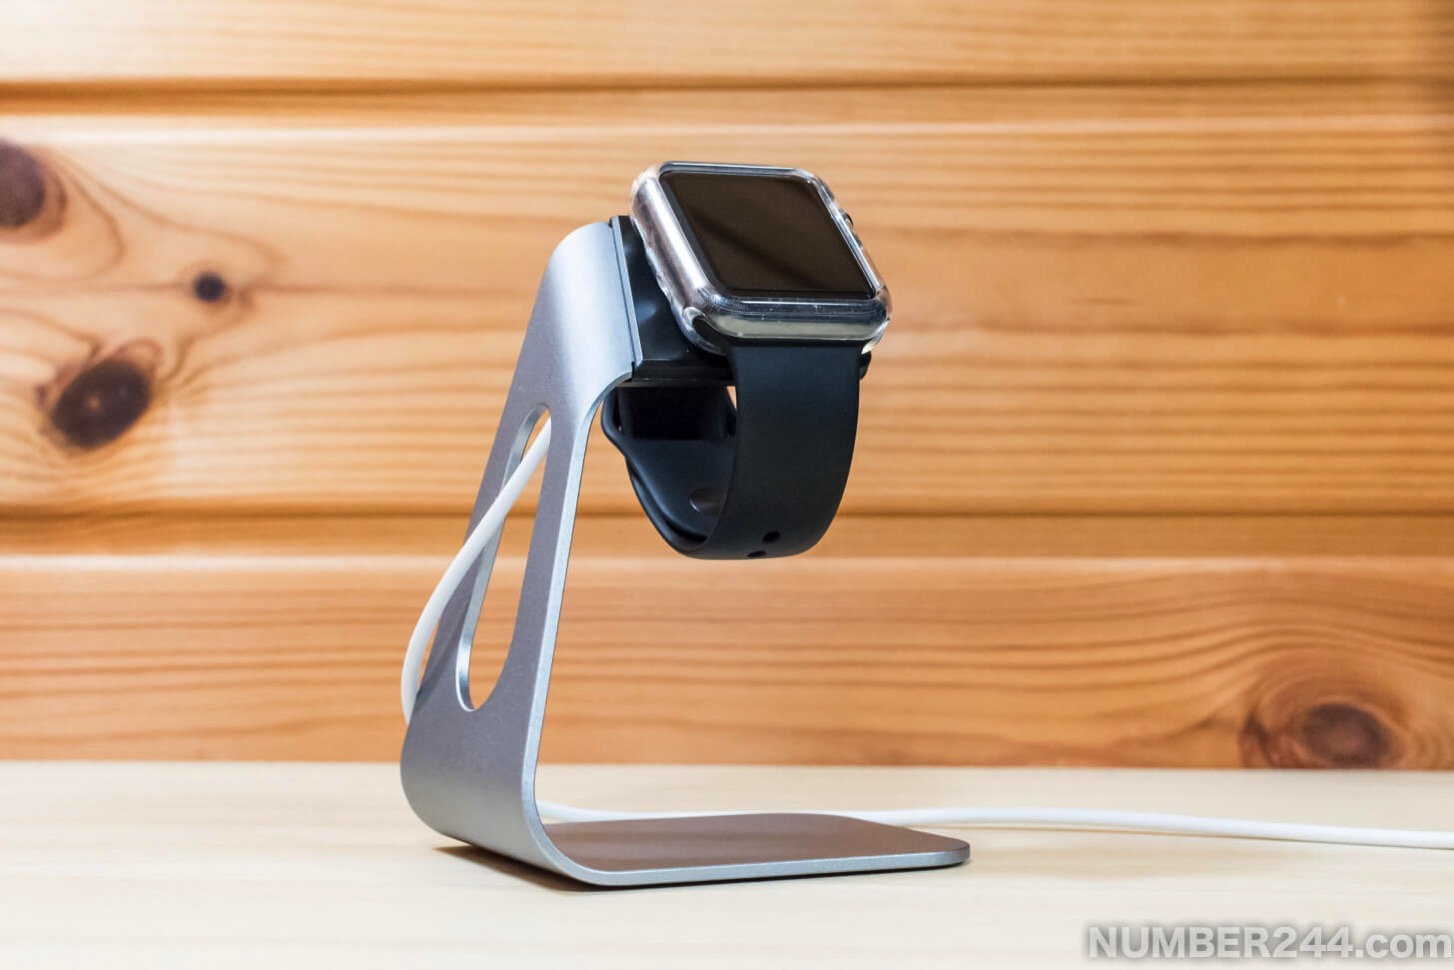 Moobom Apple Watch stand11